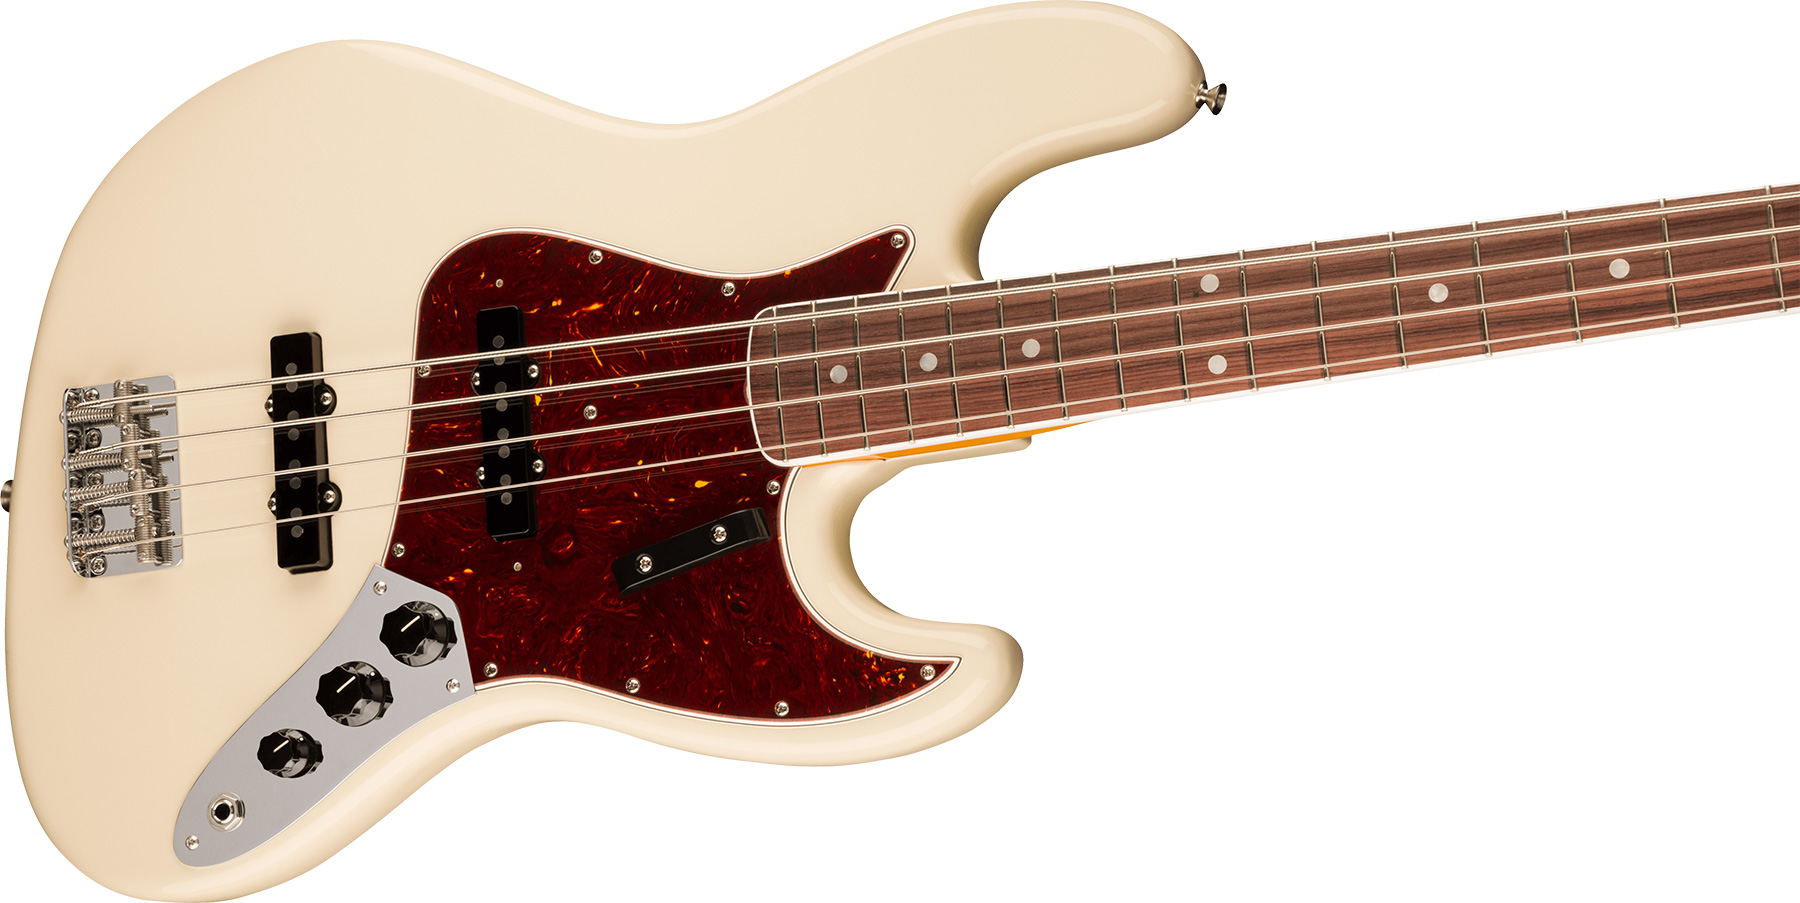 Fender Jazz Bass 1966 American Vintage Ii Usa Rw - Olympic White - Solid body electric bass - Variation 2